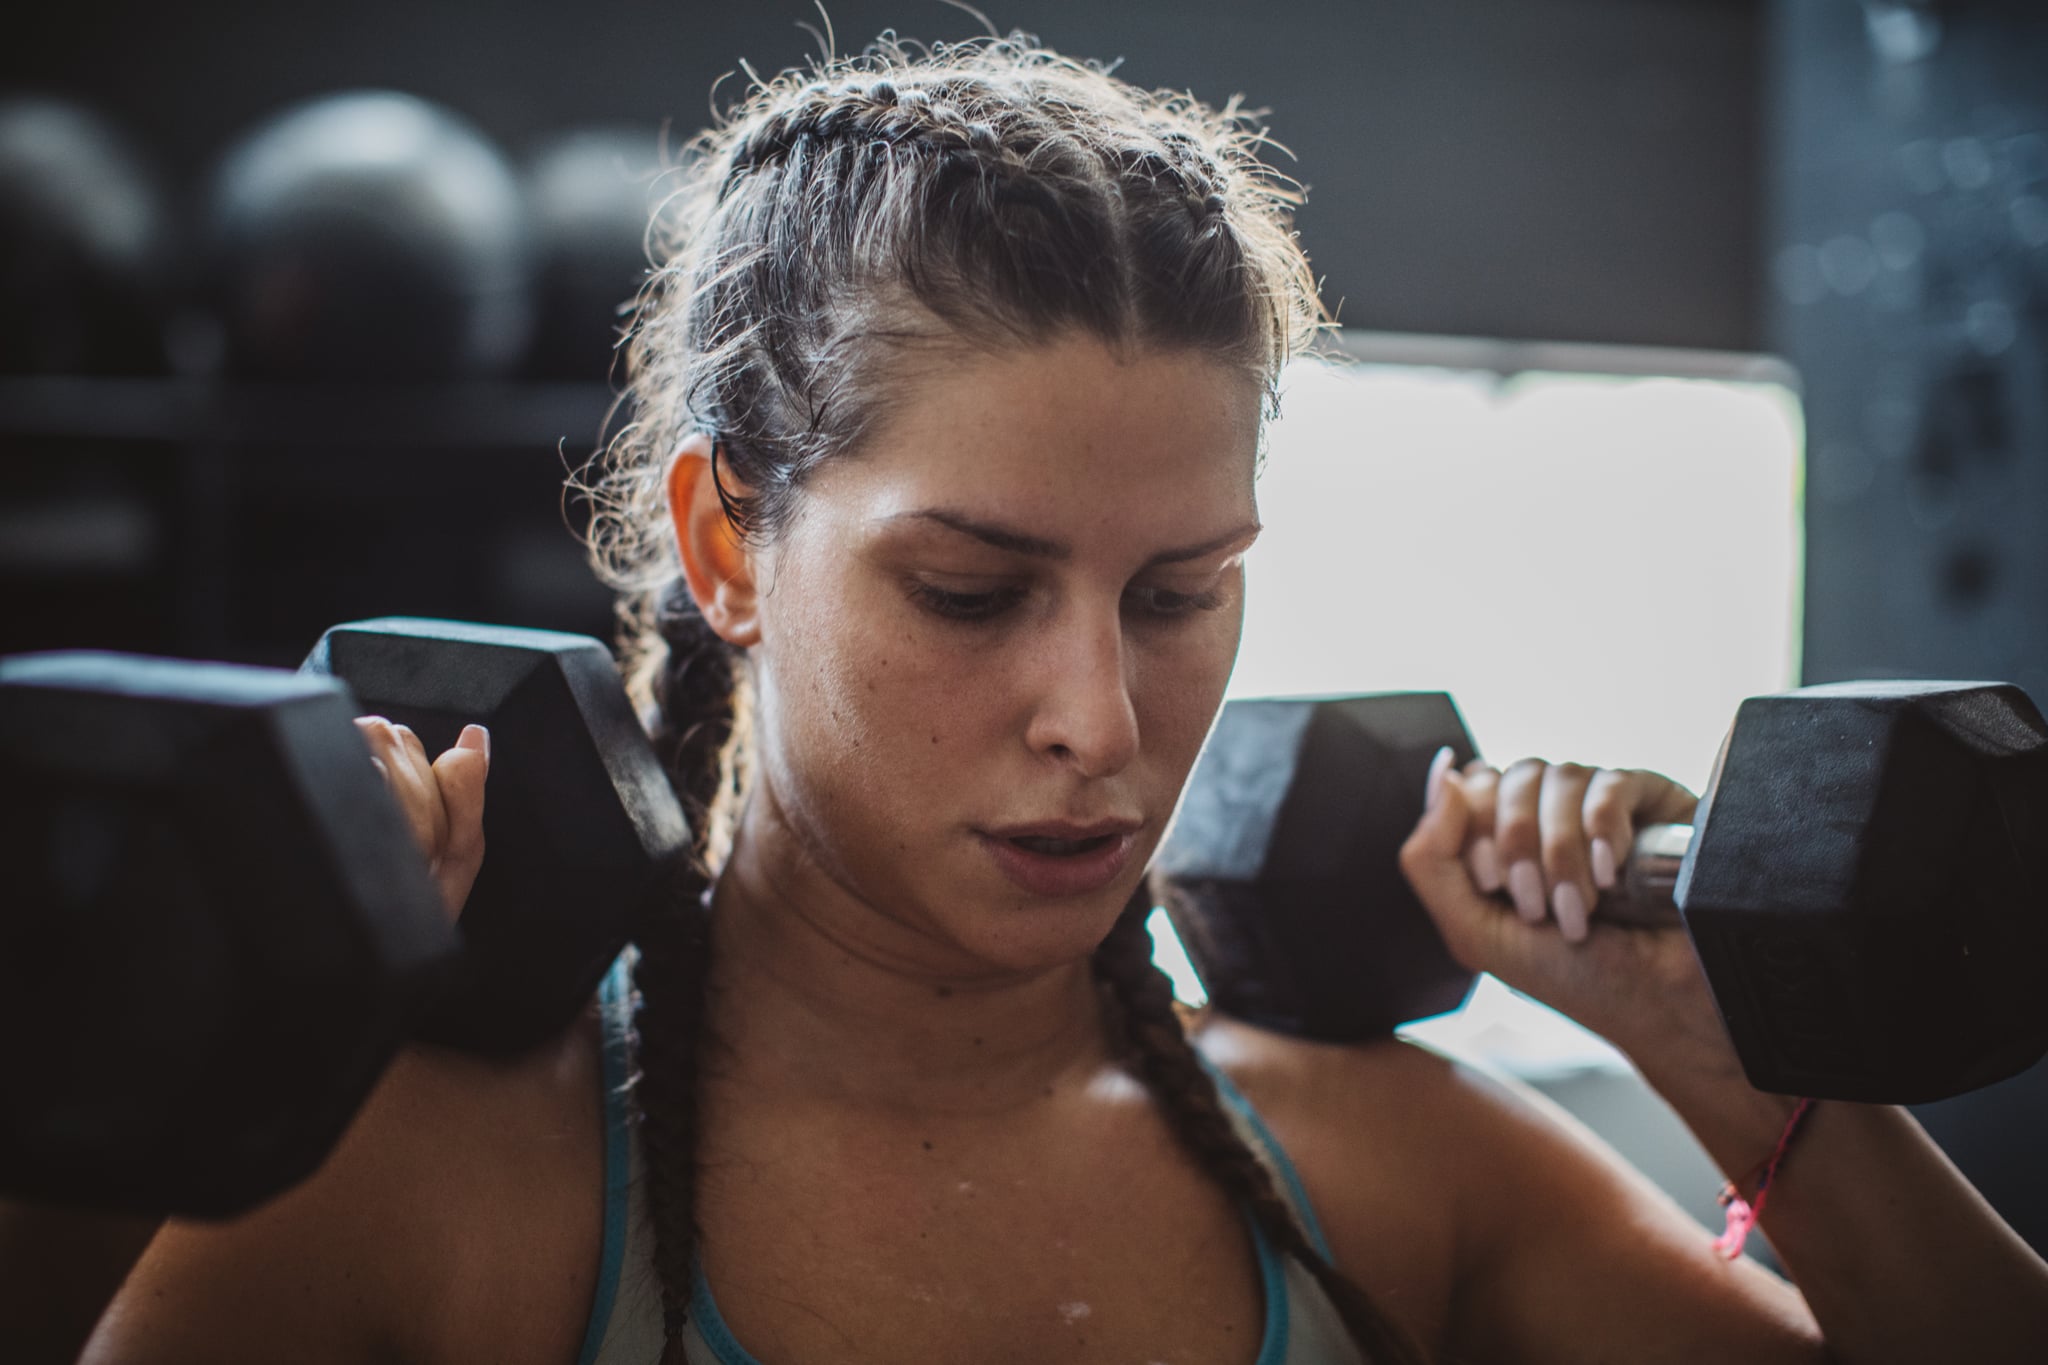 Woman weightlifting with dumbbells in gym